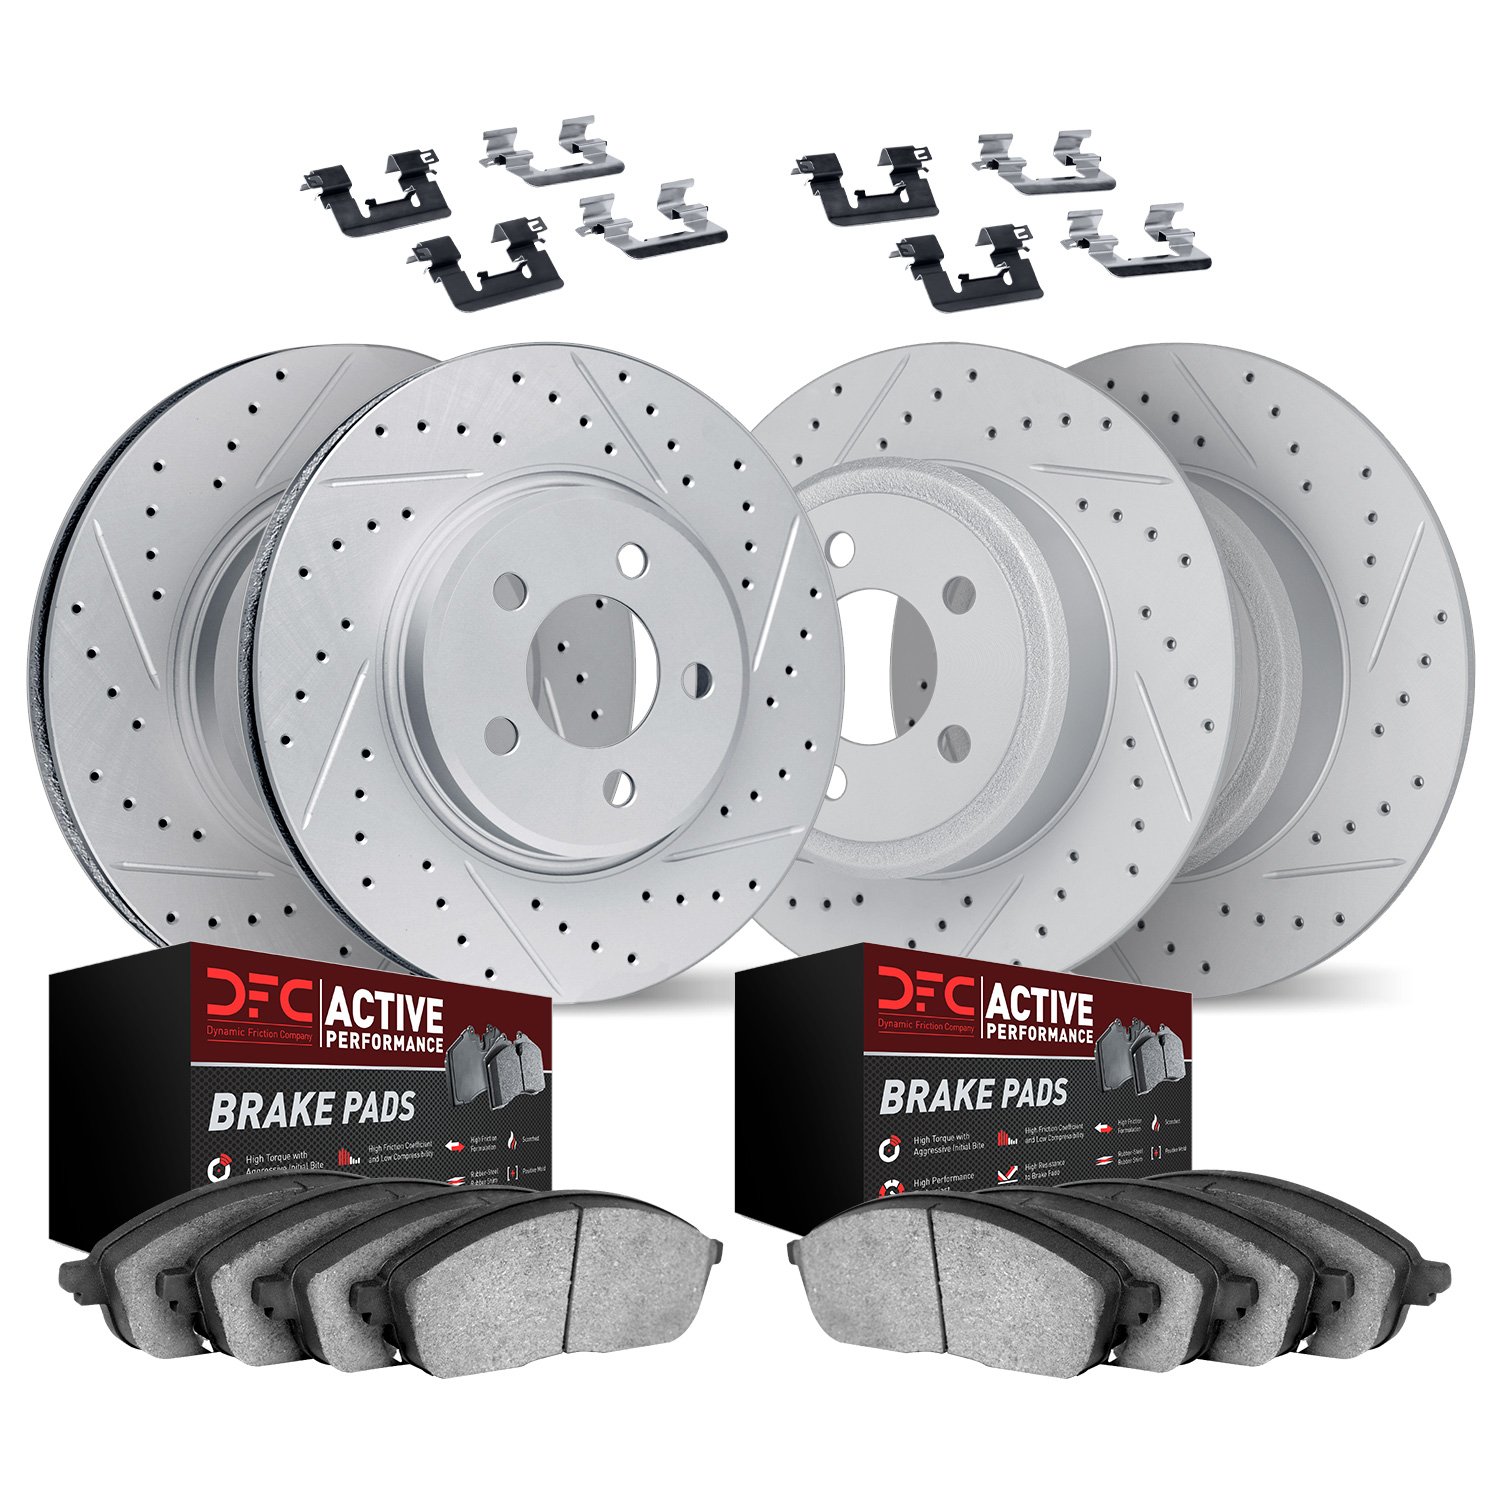 2714-67021 Geoperformance Drilled/Slotted Brake Rotors with Active Performance Pads Kit & Hardware, 2013-2019 Infiniti/Nissan, P